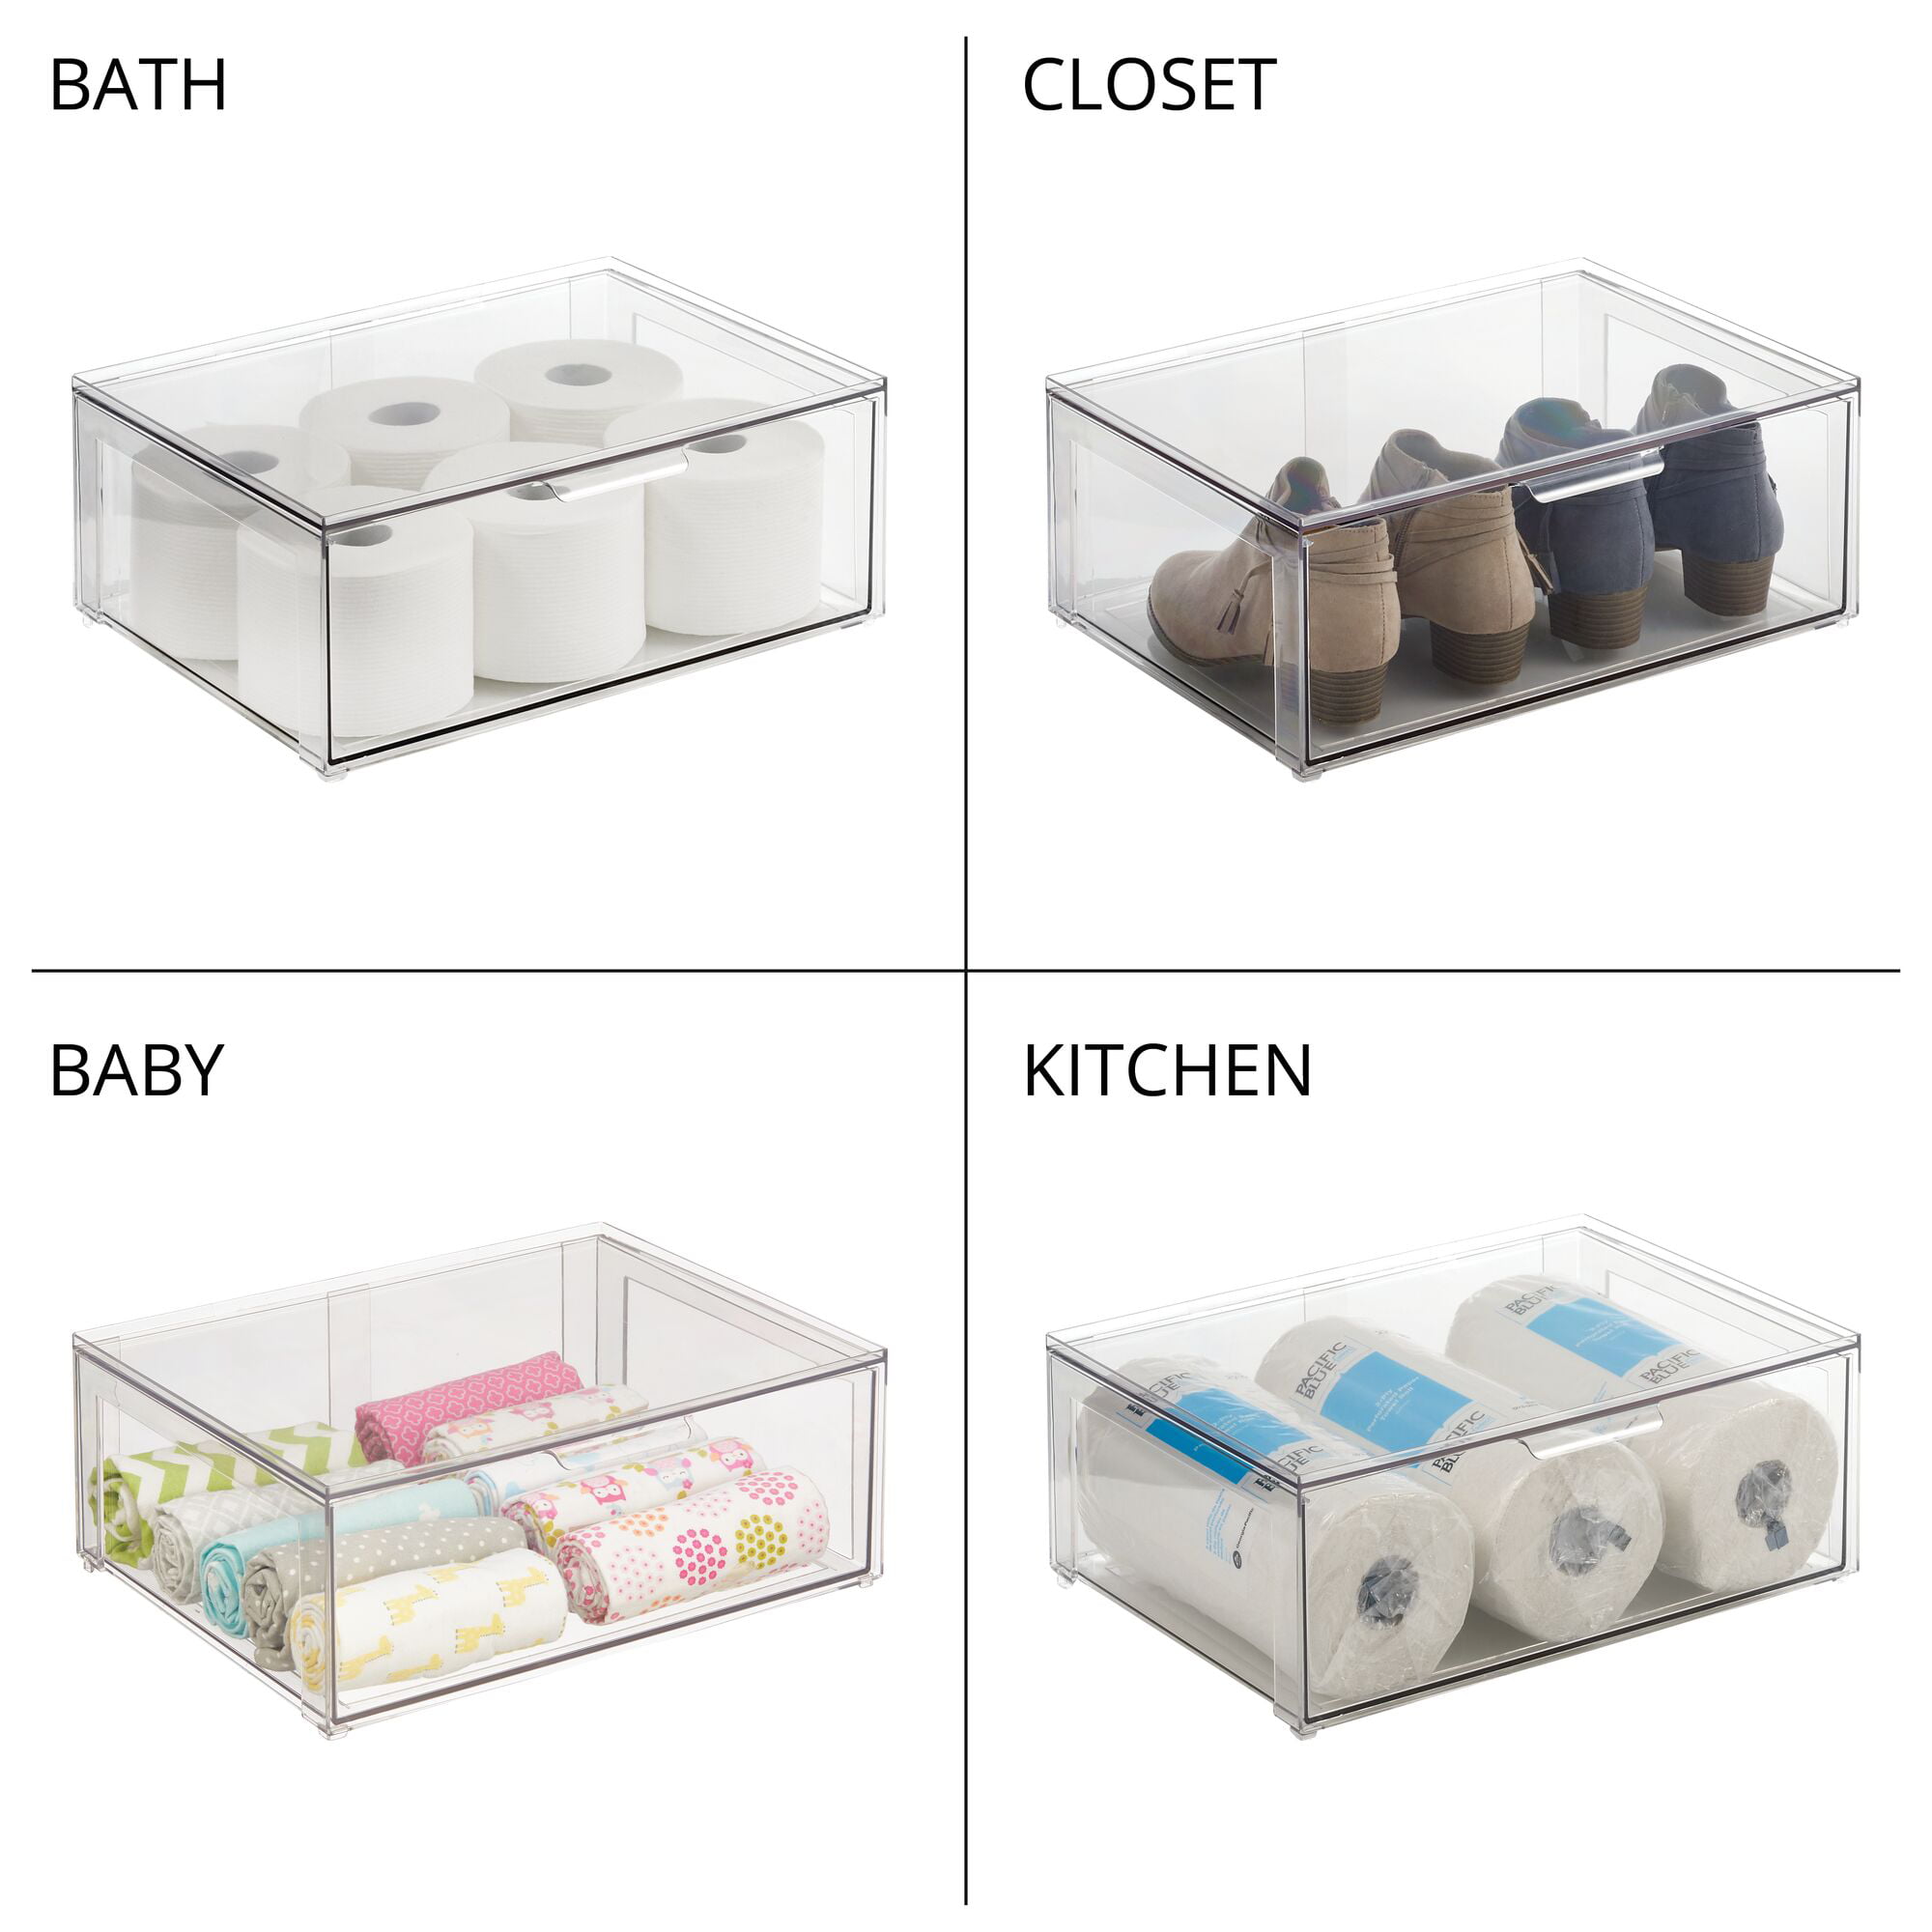 36CM High Kitchen Cabinet Baby Bottle Storage Box Living Room Drawer  ABS+PET Organizer with Holding Tray - Beige